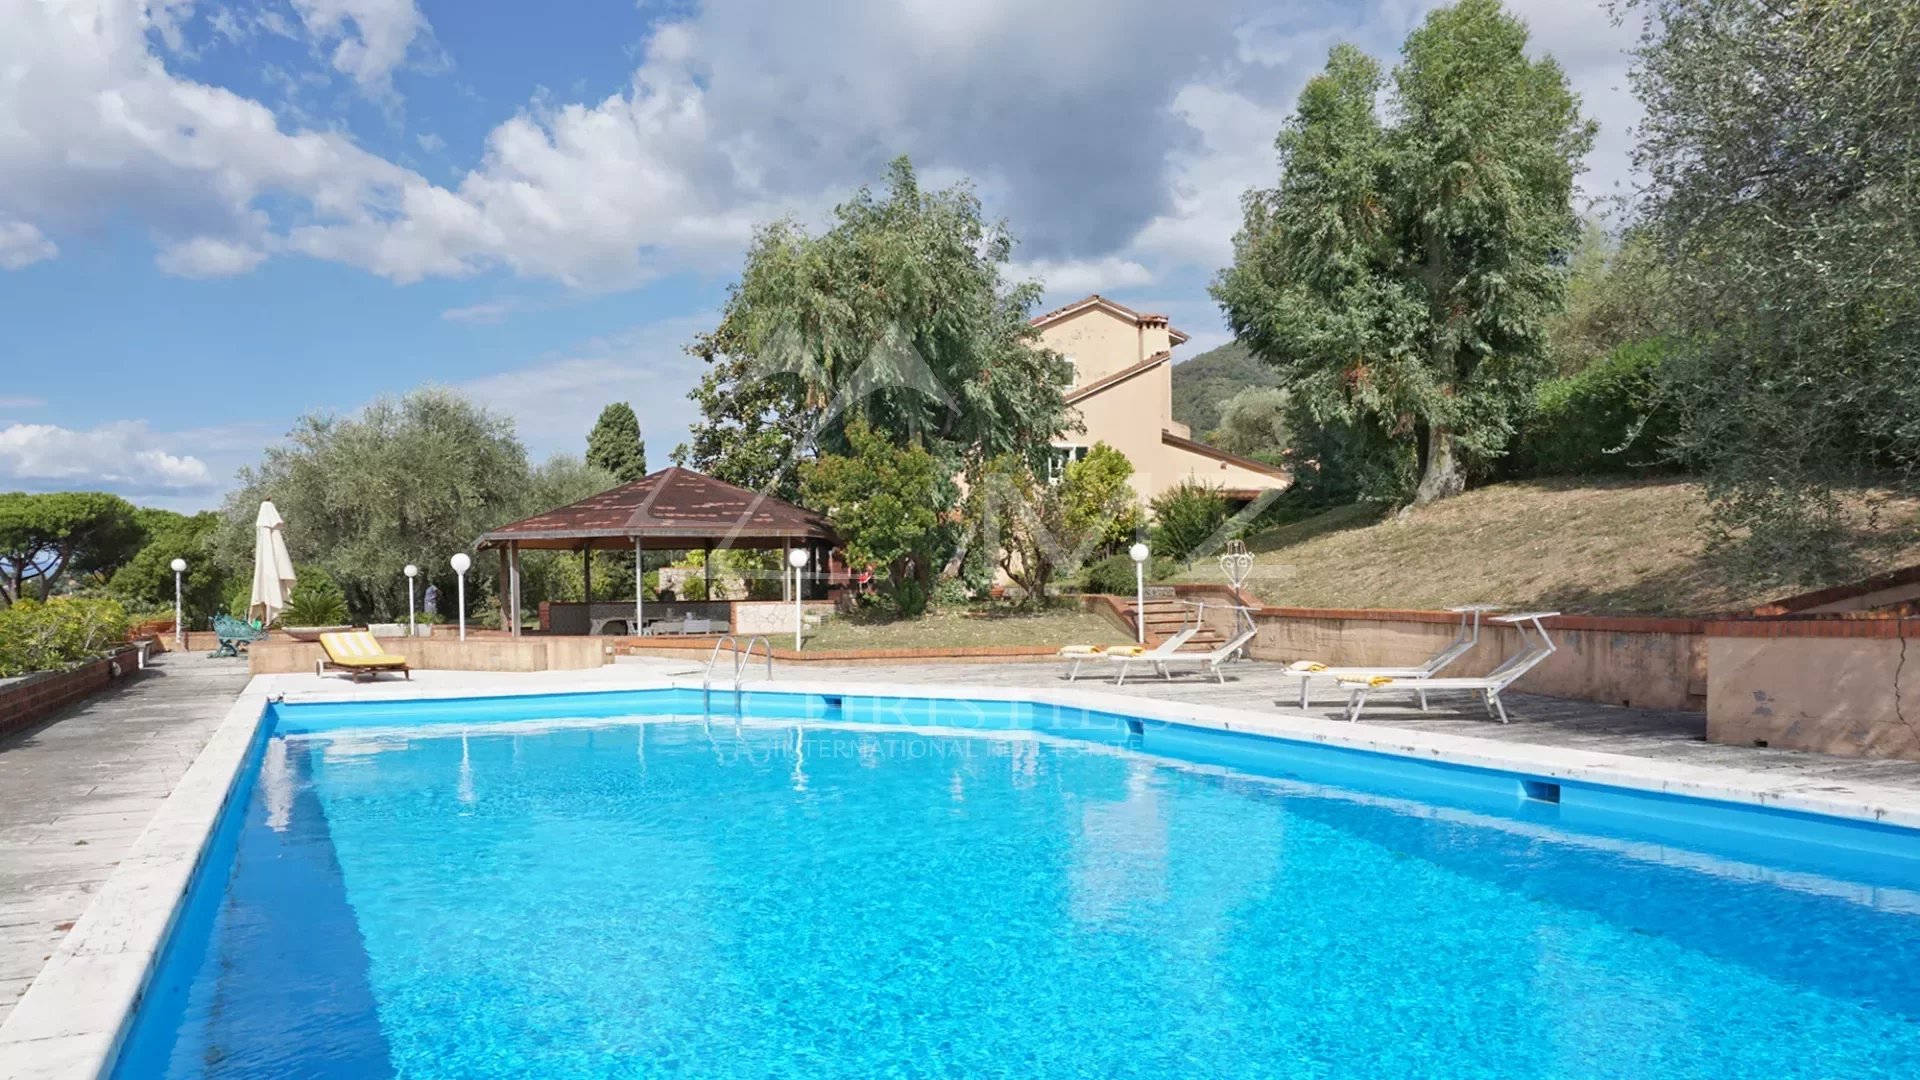 Elegant villa with swimming pool, vineyard and large land a short distance from the sea